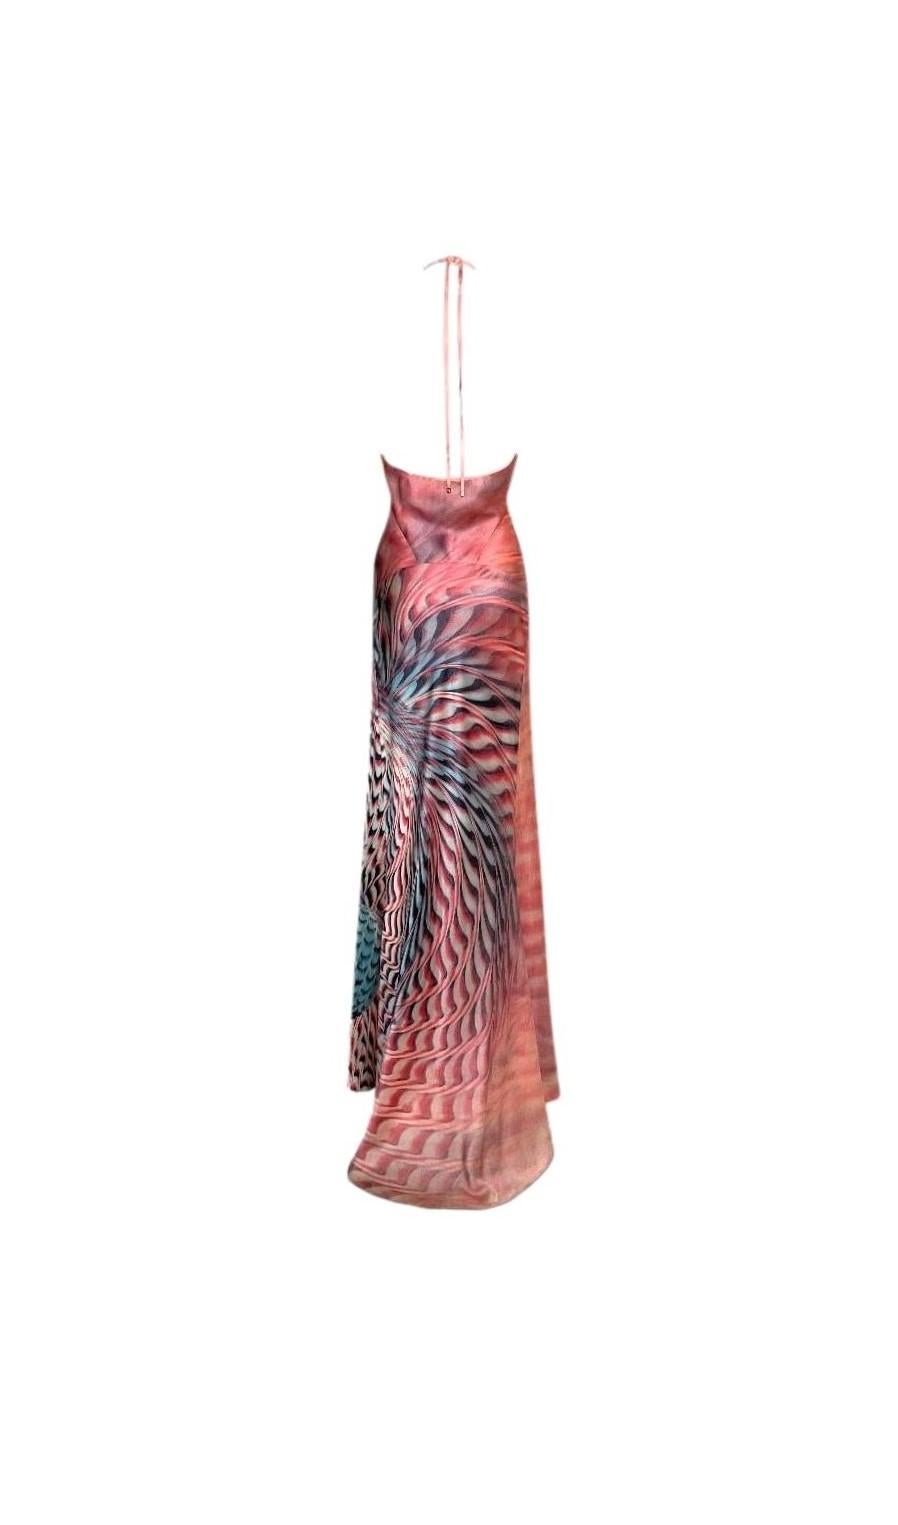 S/S 2001 Roberto Cavalli Pink Psychedelic Print Silk Maxi Gown Dress ...